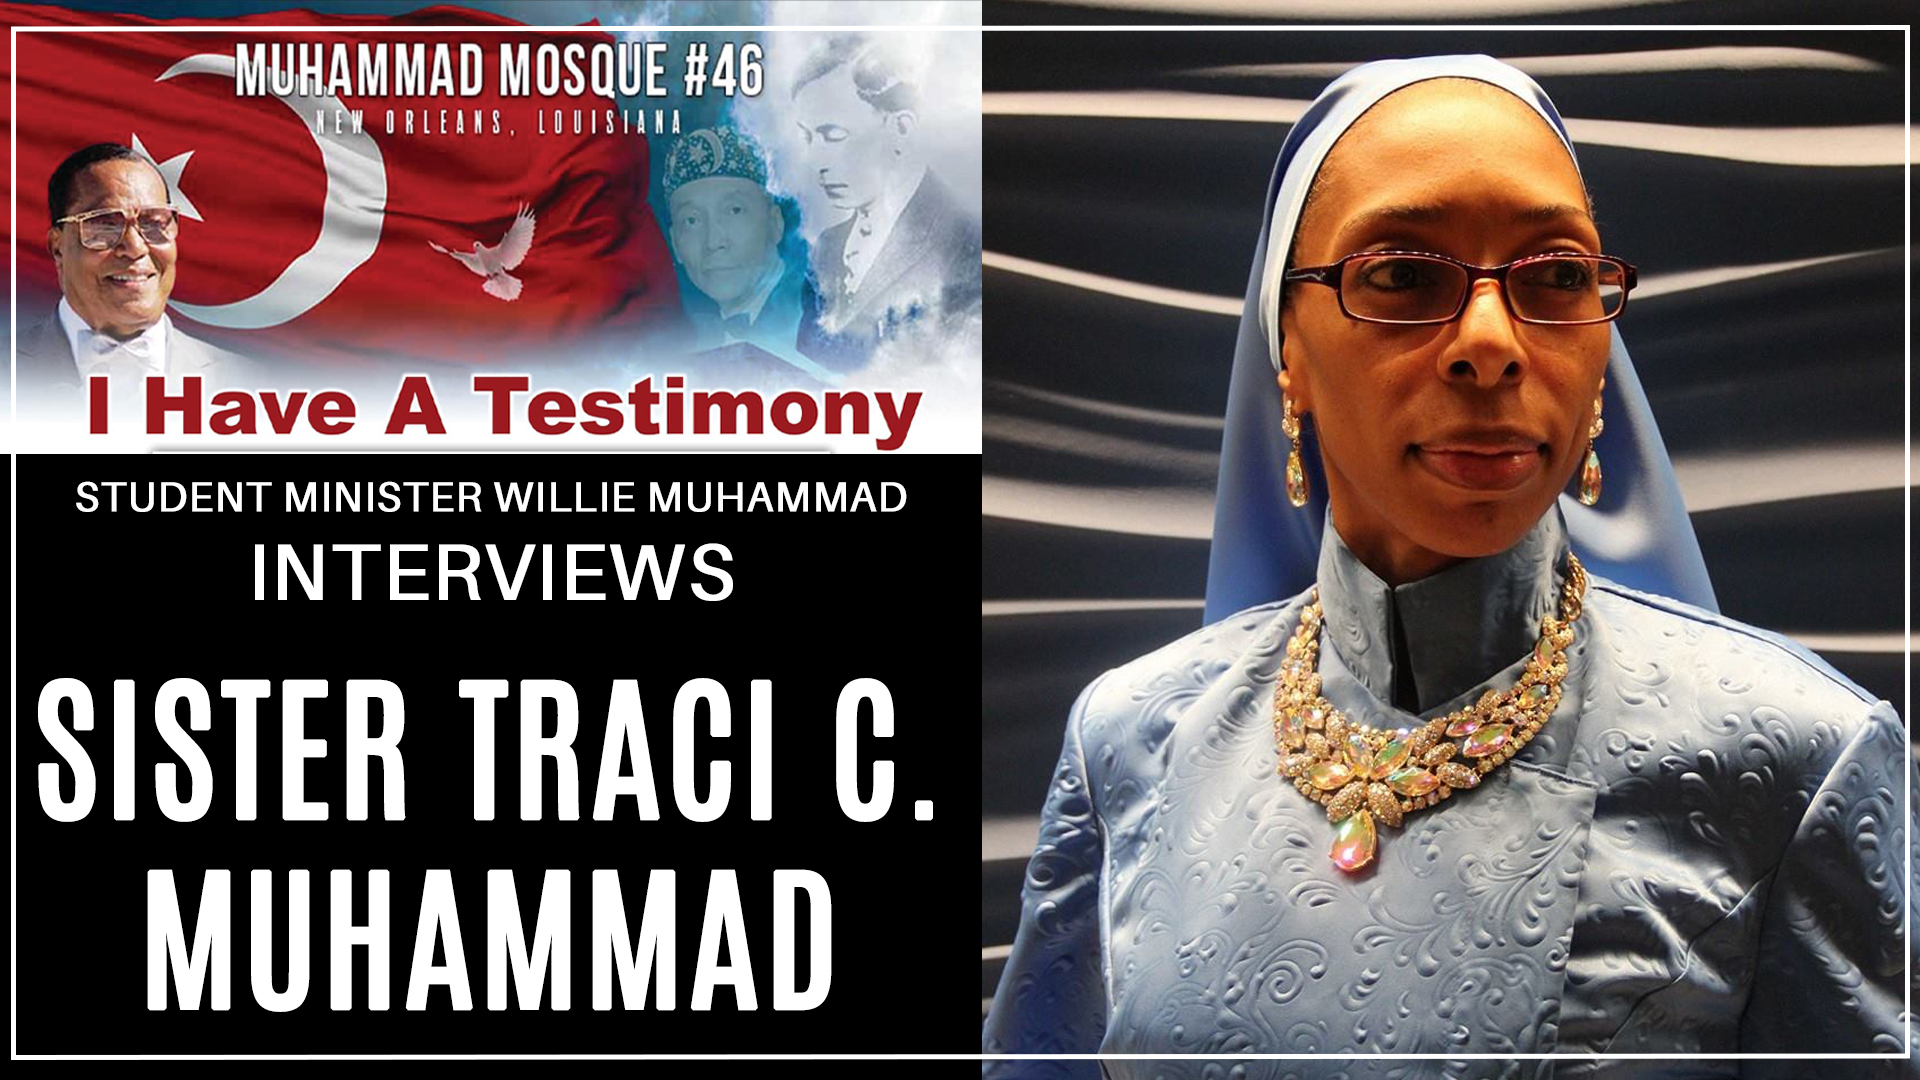 I Have A Testimony: Interview with Sister Traci C Muhammad